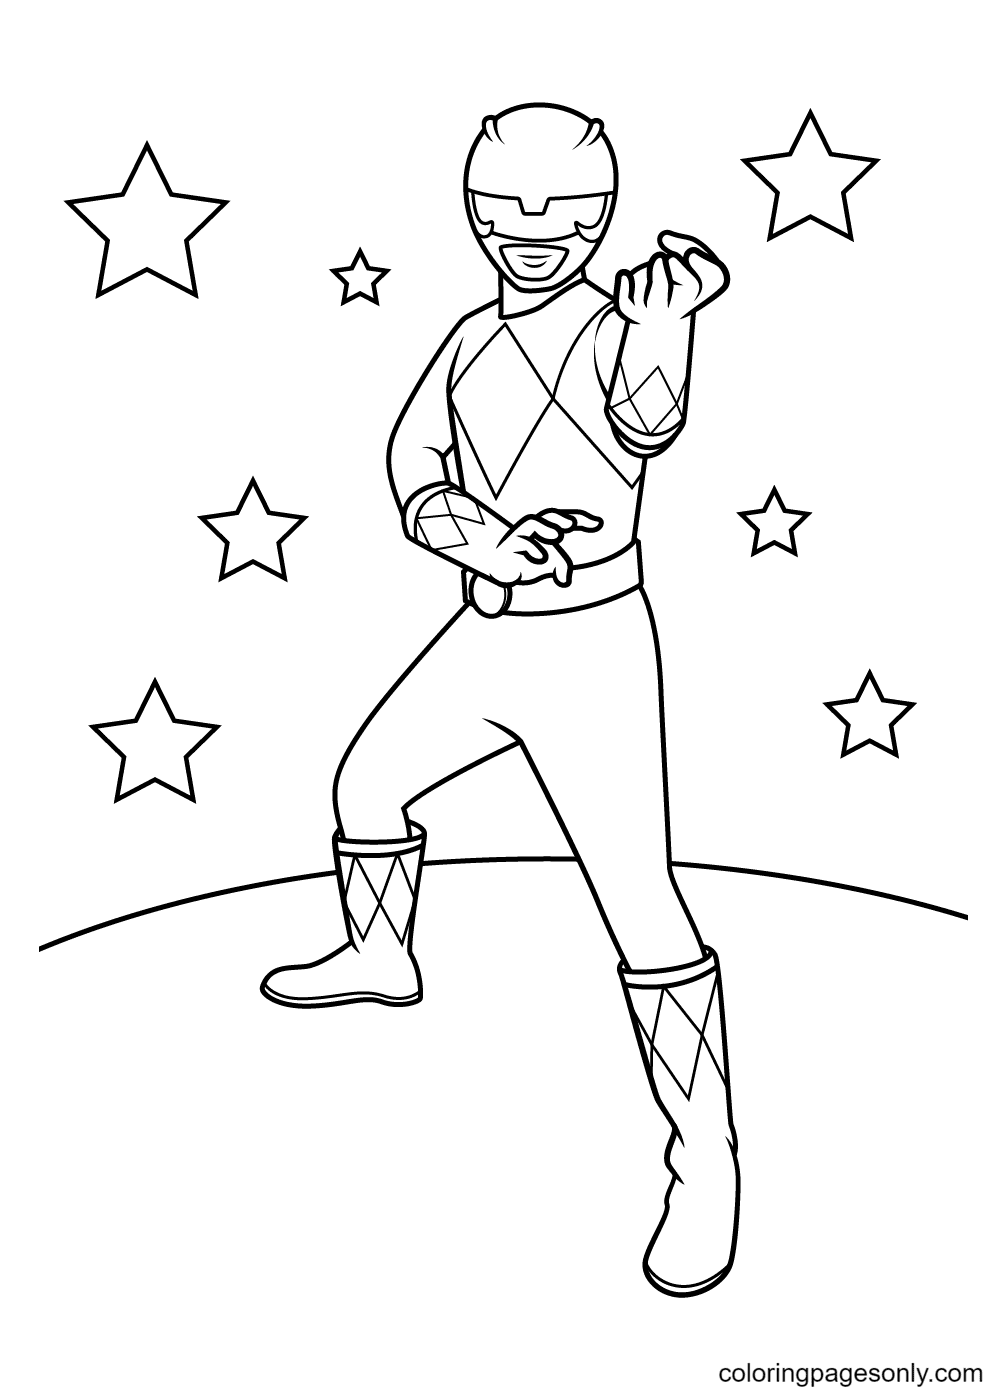 Black Ranger Coloring Pages